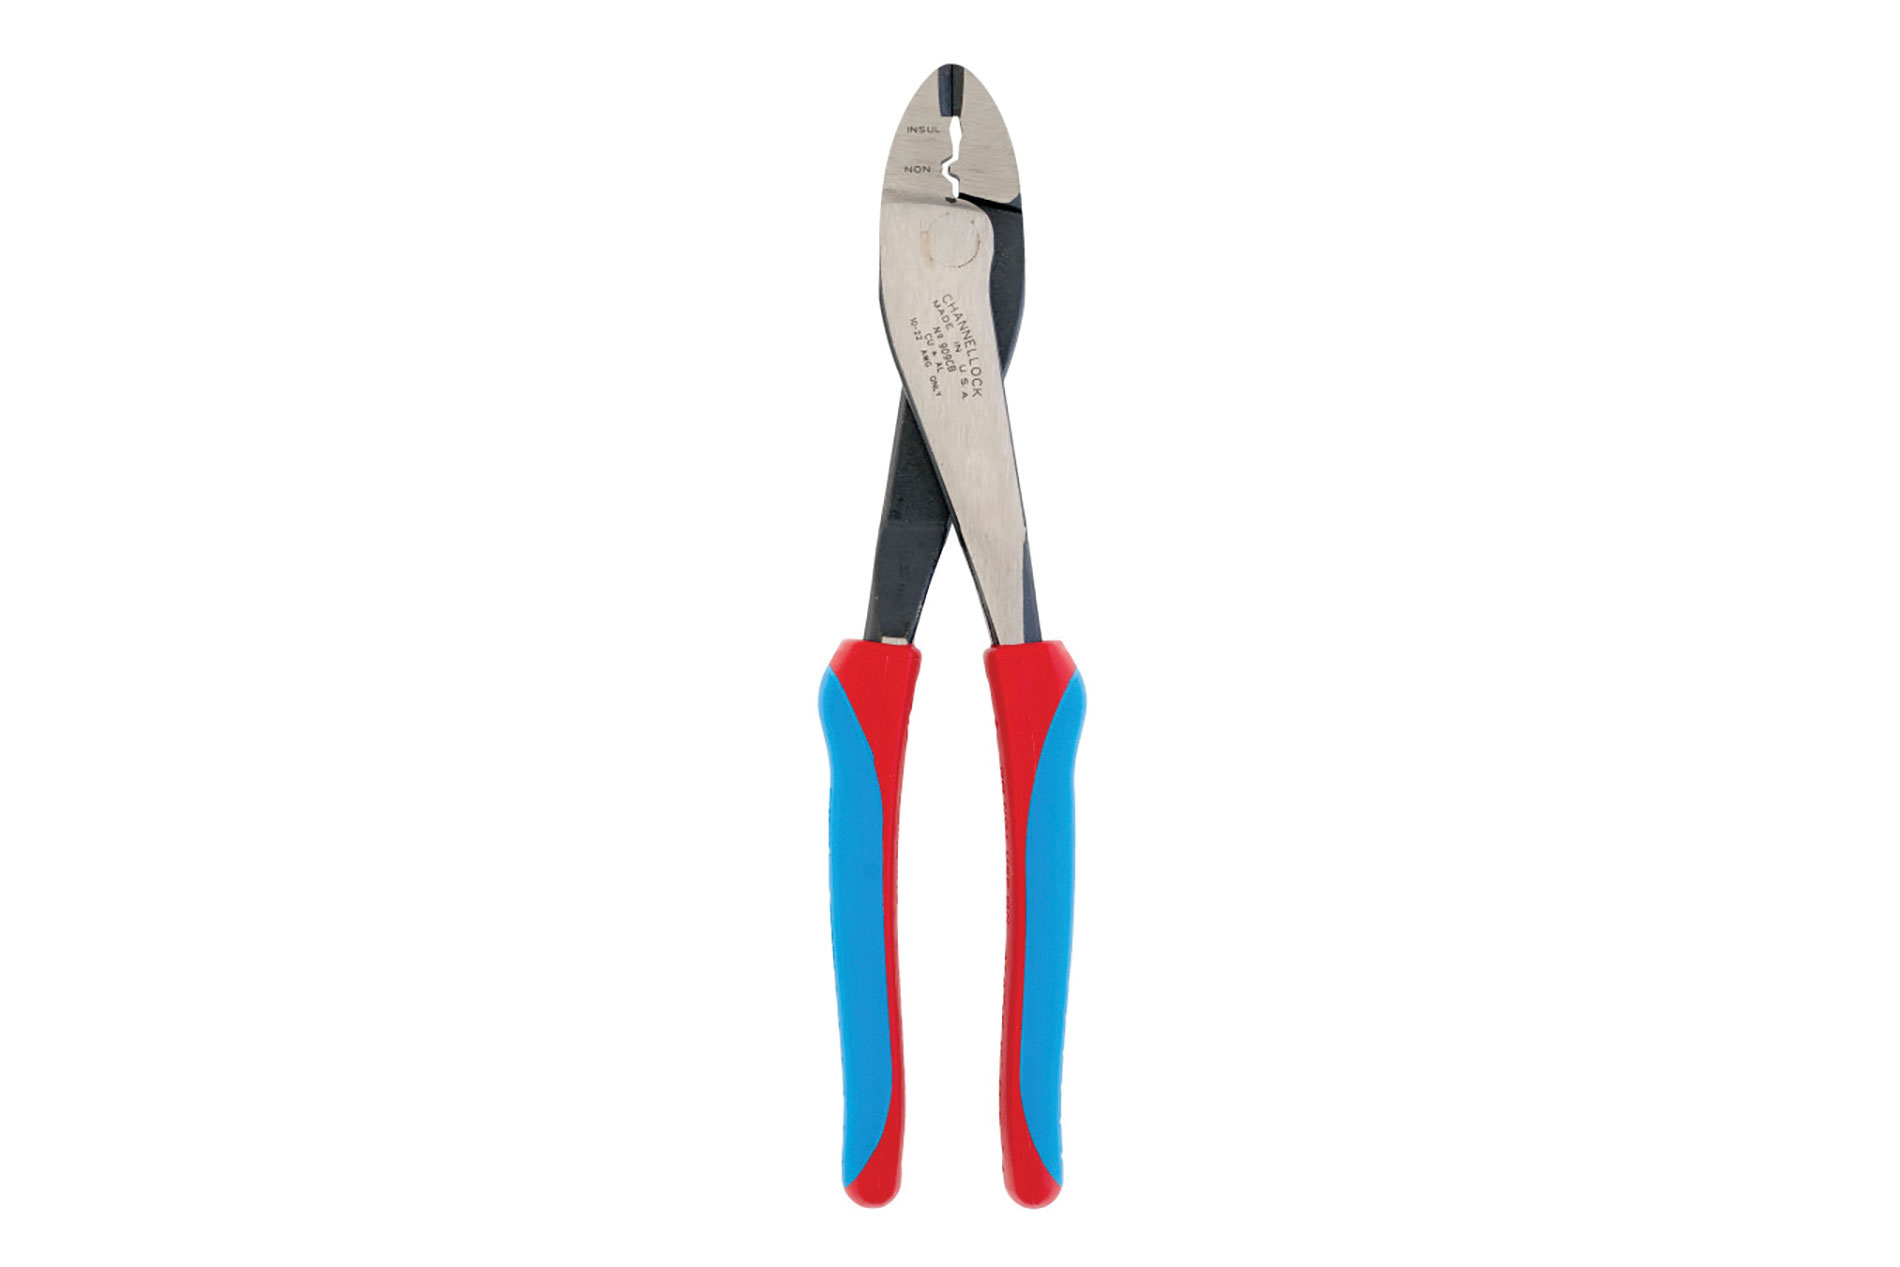 Crimper and cutter with a center cut design and blue and red handles. Image by Channellock.